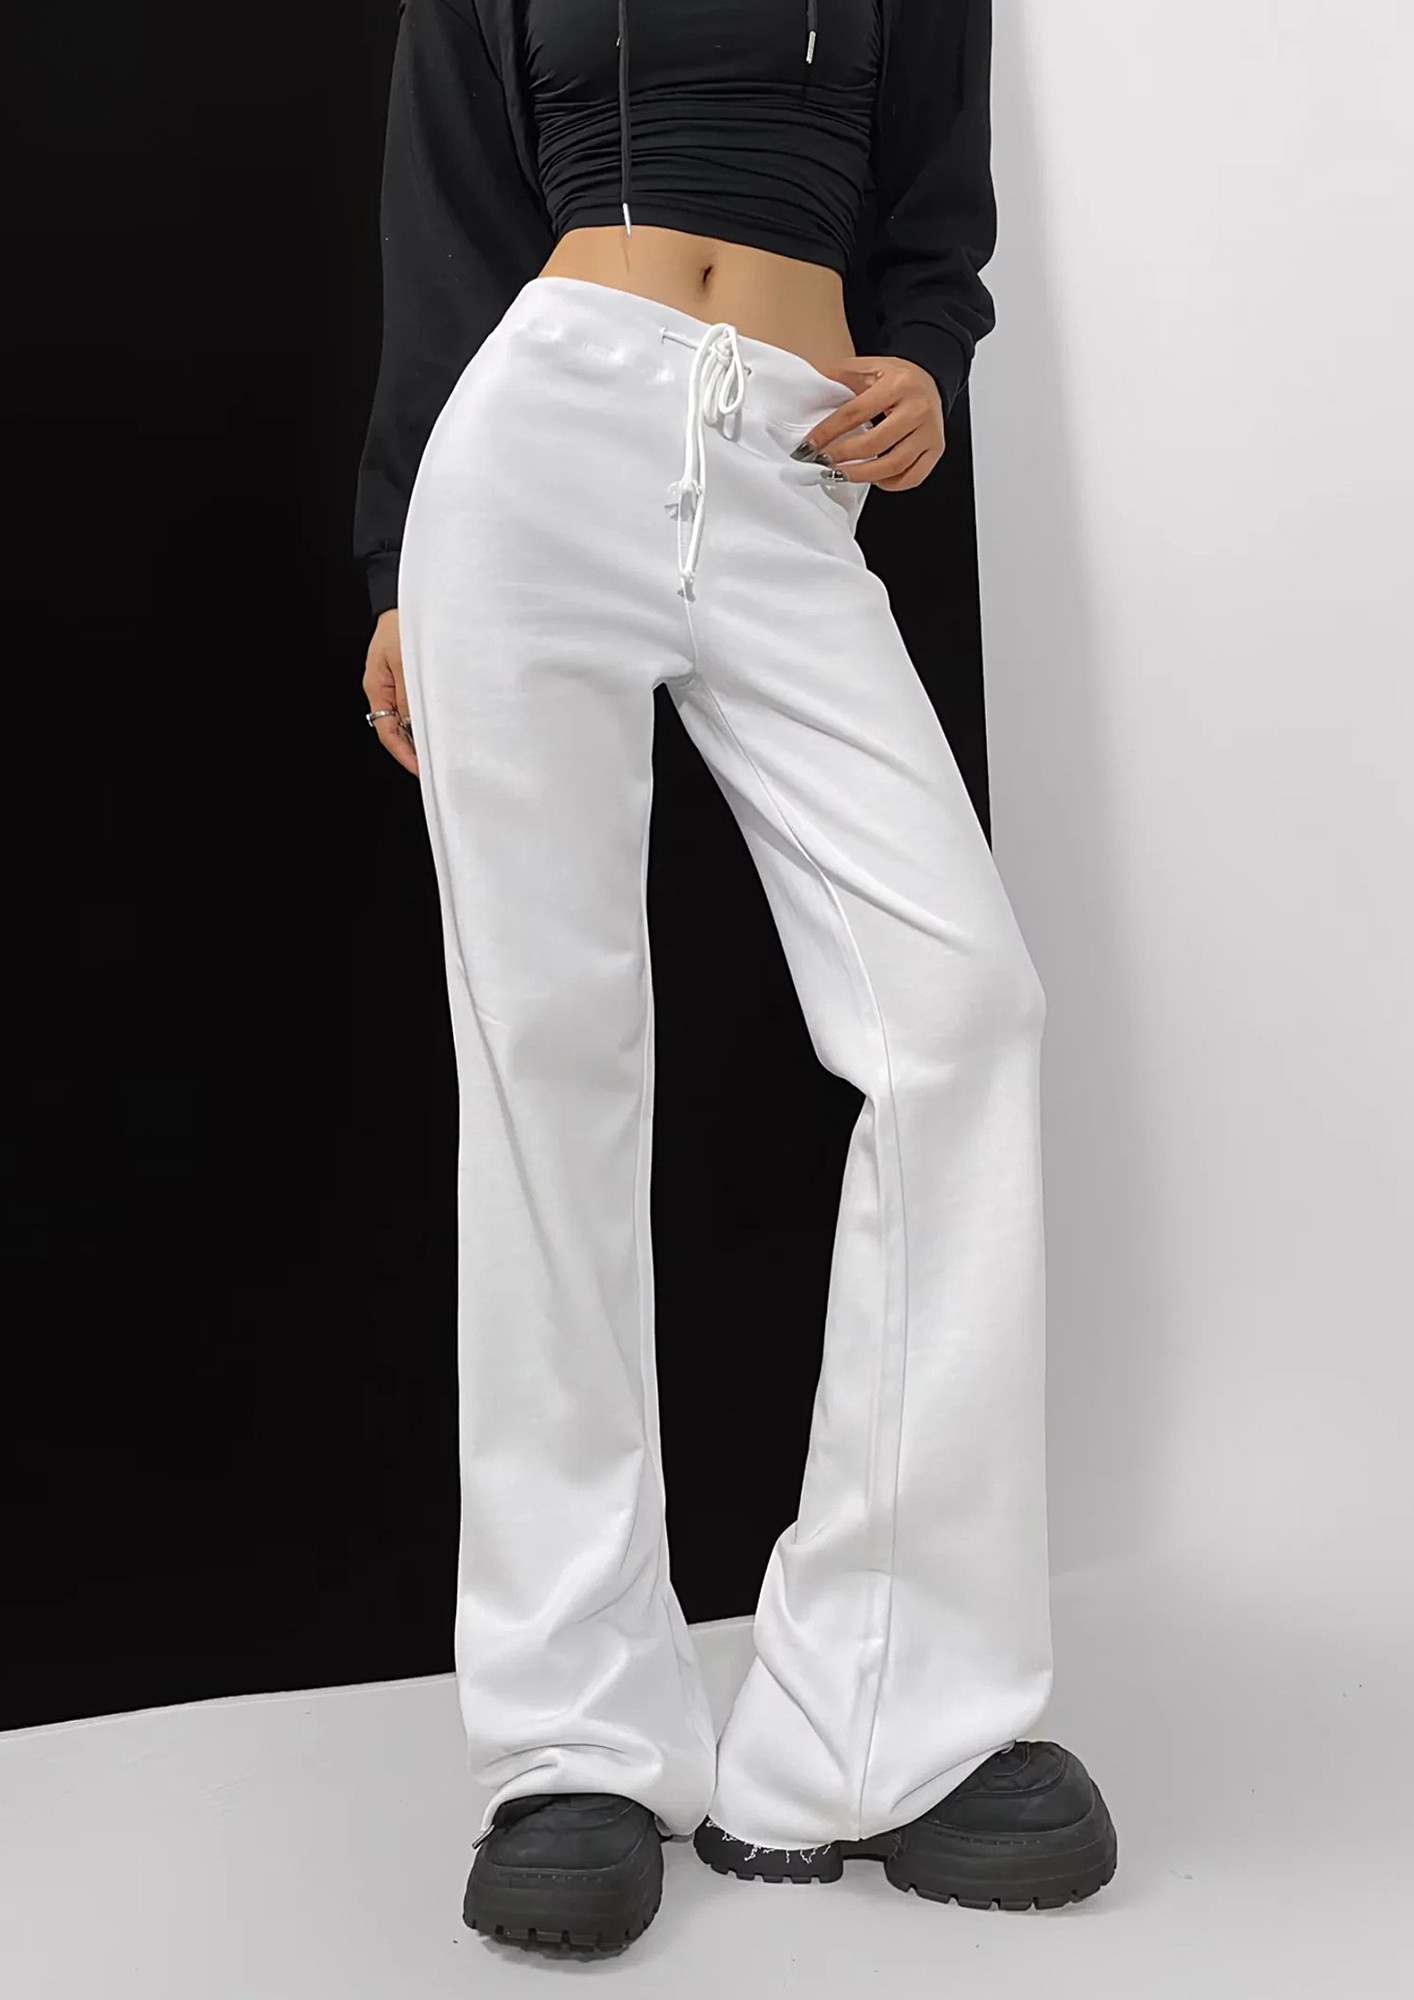 Buy White Wide Leg Pants for Women Online in India